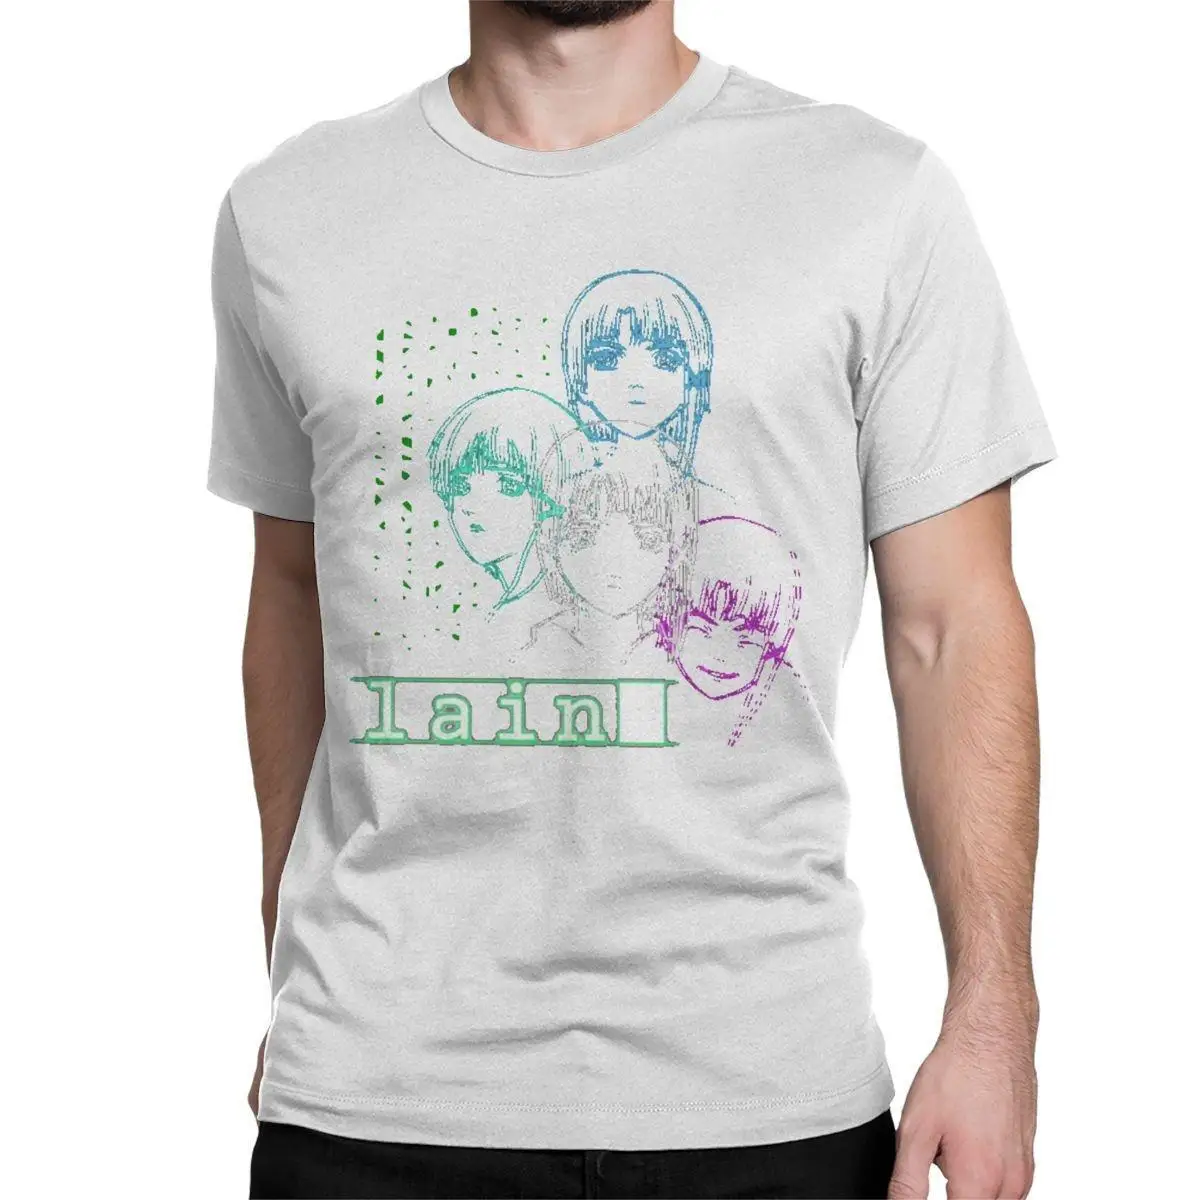 Men Serial Experiments Lain T Shirts Pure Cotton Tops Fashion Short Sleeve Round Collar Tees Printed T-Shirts